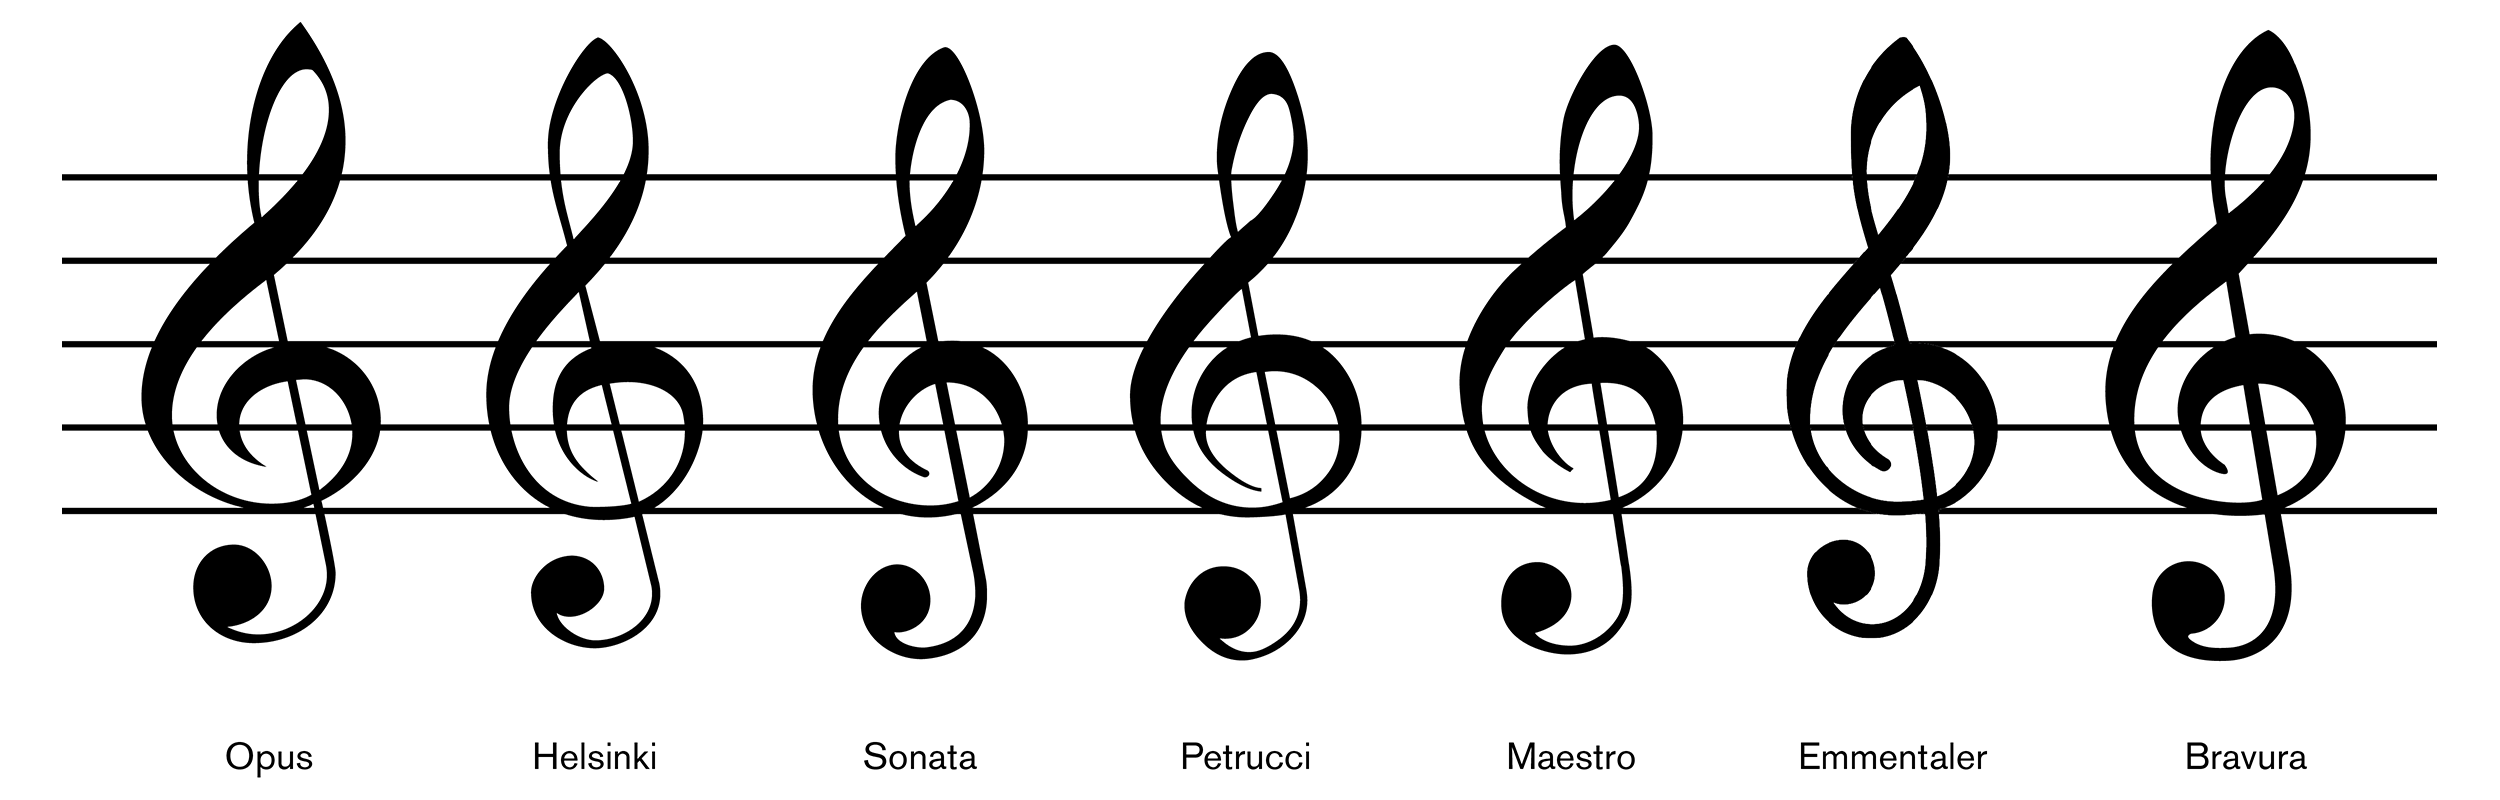 music symbol font for word